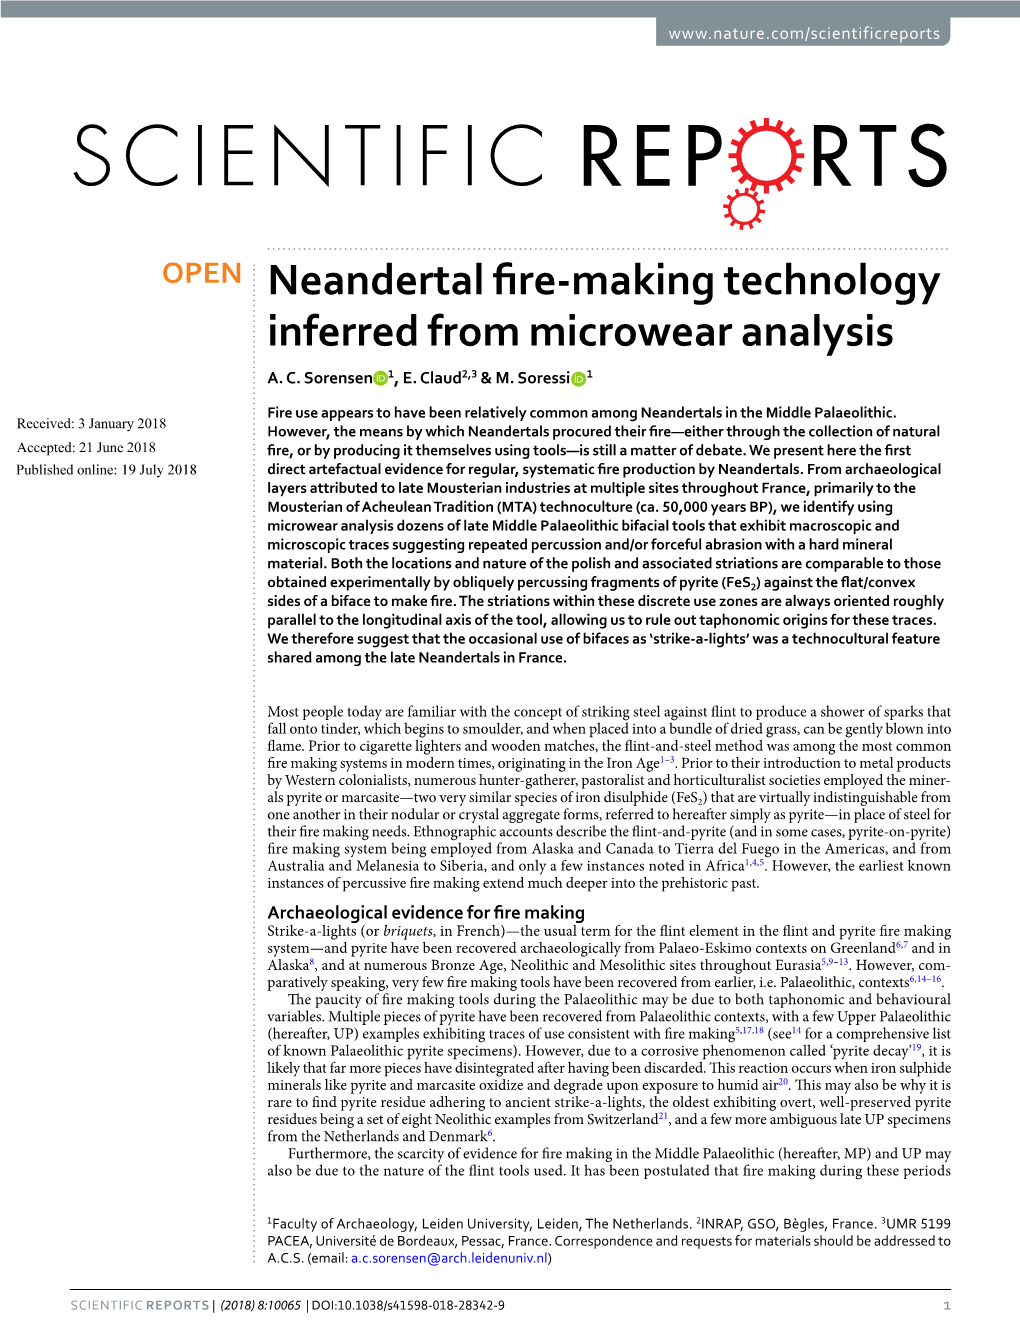 Neandertal Fire-Making Technology Inferred from Microwear Analysis